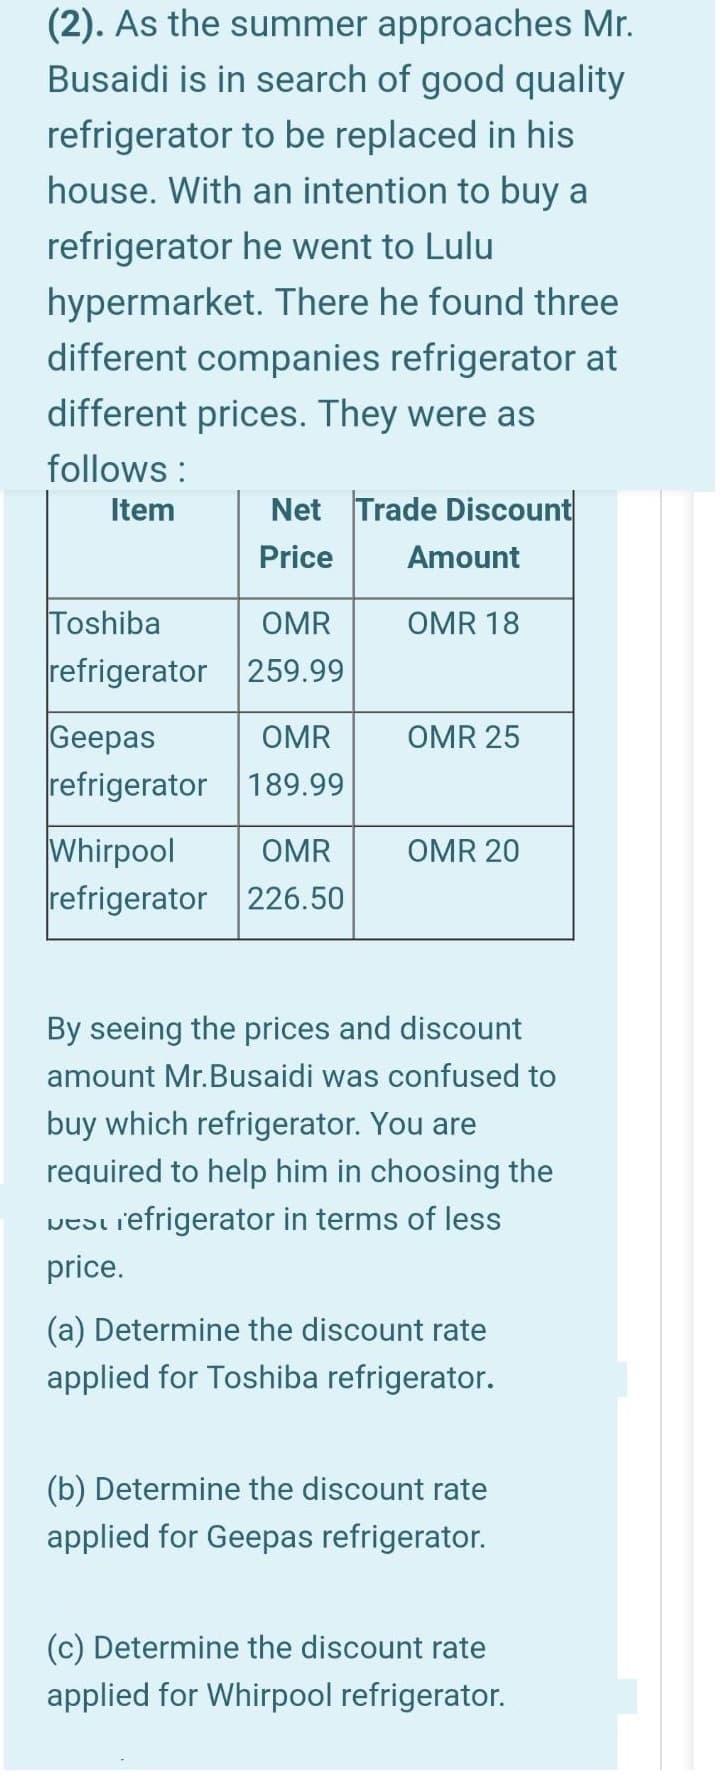 (2). As the summer approaches Mr.
Busaidi is in search of good quality
refrigerator to be replaced in his
house. With an intention to buy a
refrigerator he went to Lulu
hypermarket. There he found three
different companies refrigerator at
different prices. They were as
follows :
Item
Net Trade Discount
Price
Amount
Toshiba
refrigerator 259.99
OMR
OMR 18
Geepas
refrigerator 189.99
OMR
OMR 25
Whirpool
refrigerator 226.50
OMR
OMR 20
By seeing the prices and discount
amount Mr.Busaidi was confused to
buy which refrigerator. You are
required to help him in choosing the
JESt iefrigerator in terms of less
price.
(a) Determine the discount rate
applied for Toshiba refrigerator.
(b) Determine the discount rate
applied for Geepas refrigerator.
(c) Determine the discount rate
applied for Whirpool refrigerator.
